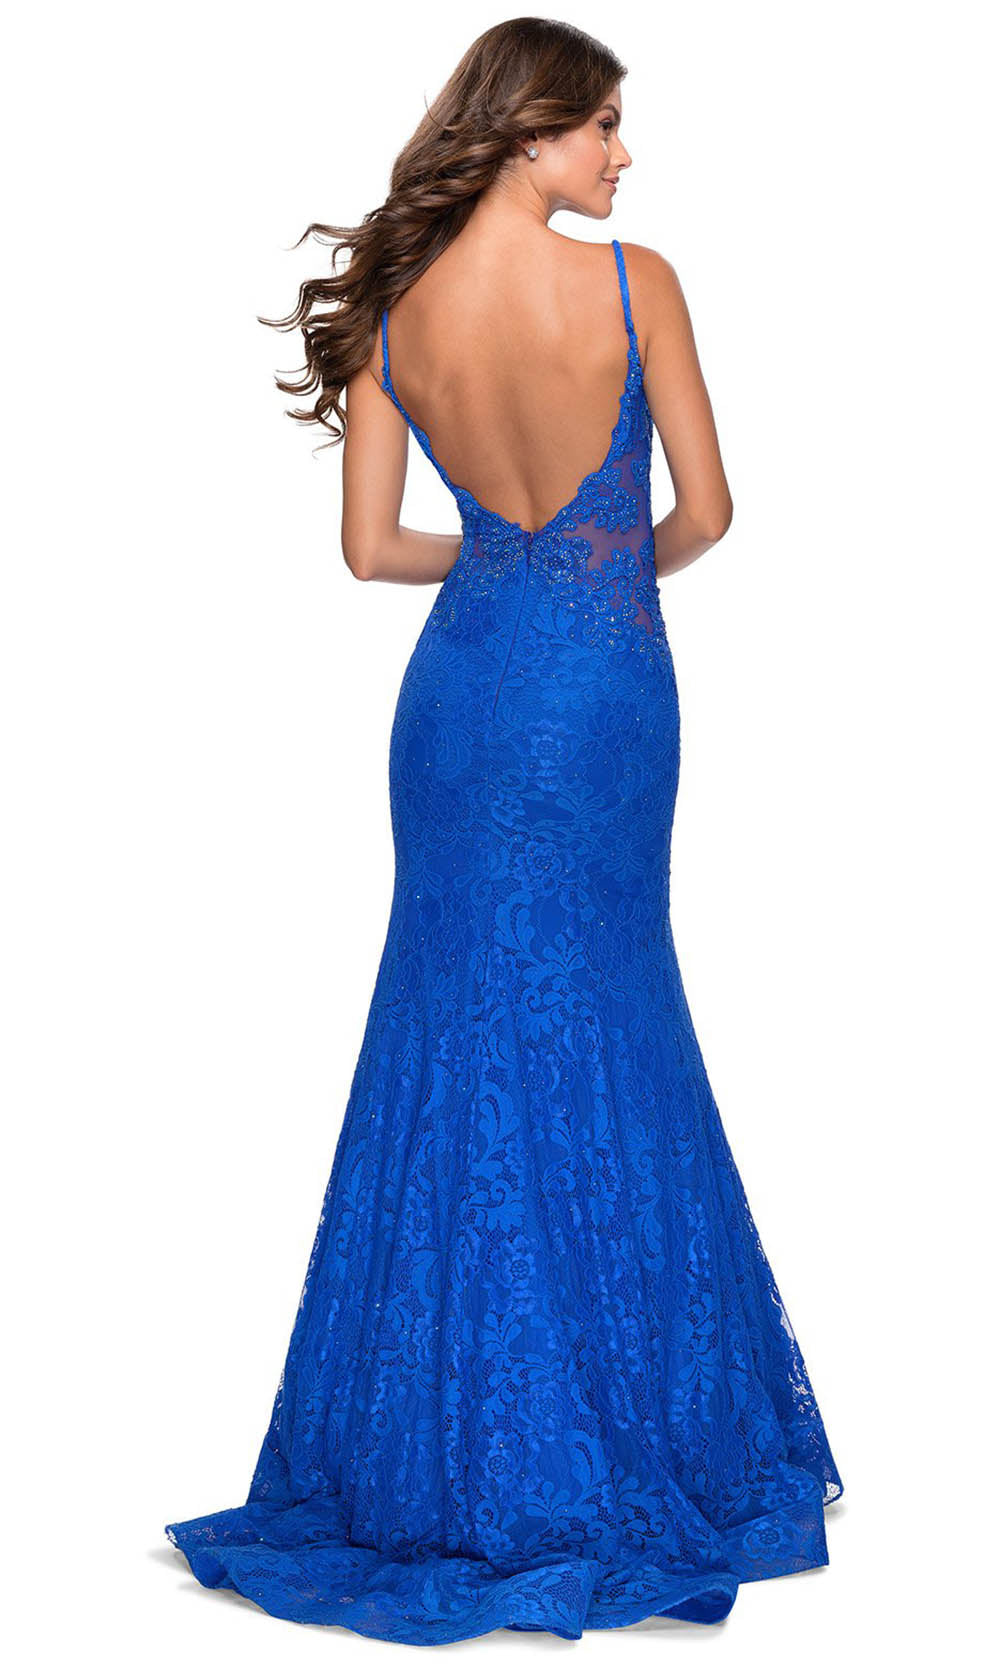 La Femme - 28355 Sparkly Lace Illusion Bodice Mermaid Gown In Blue